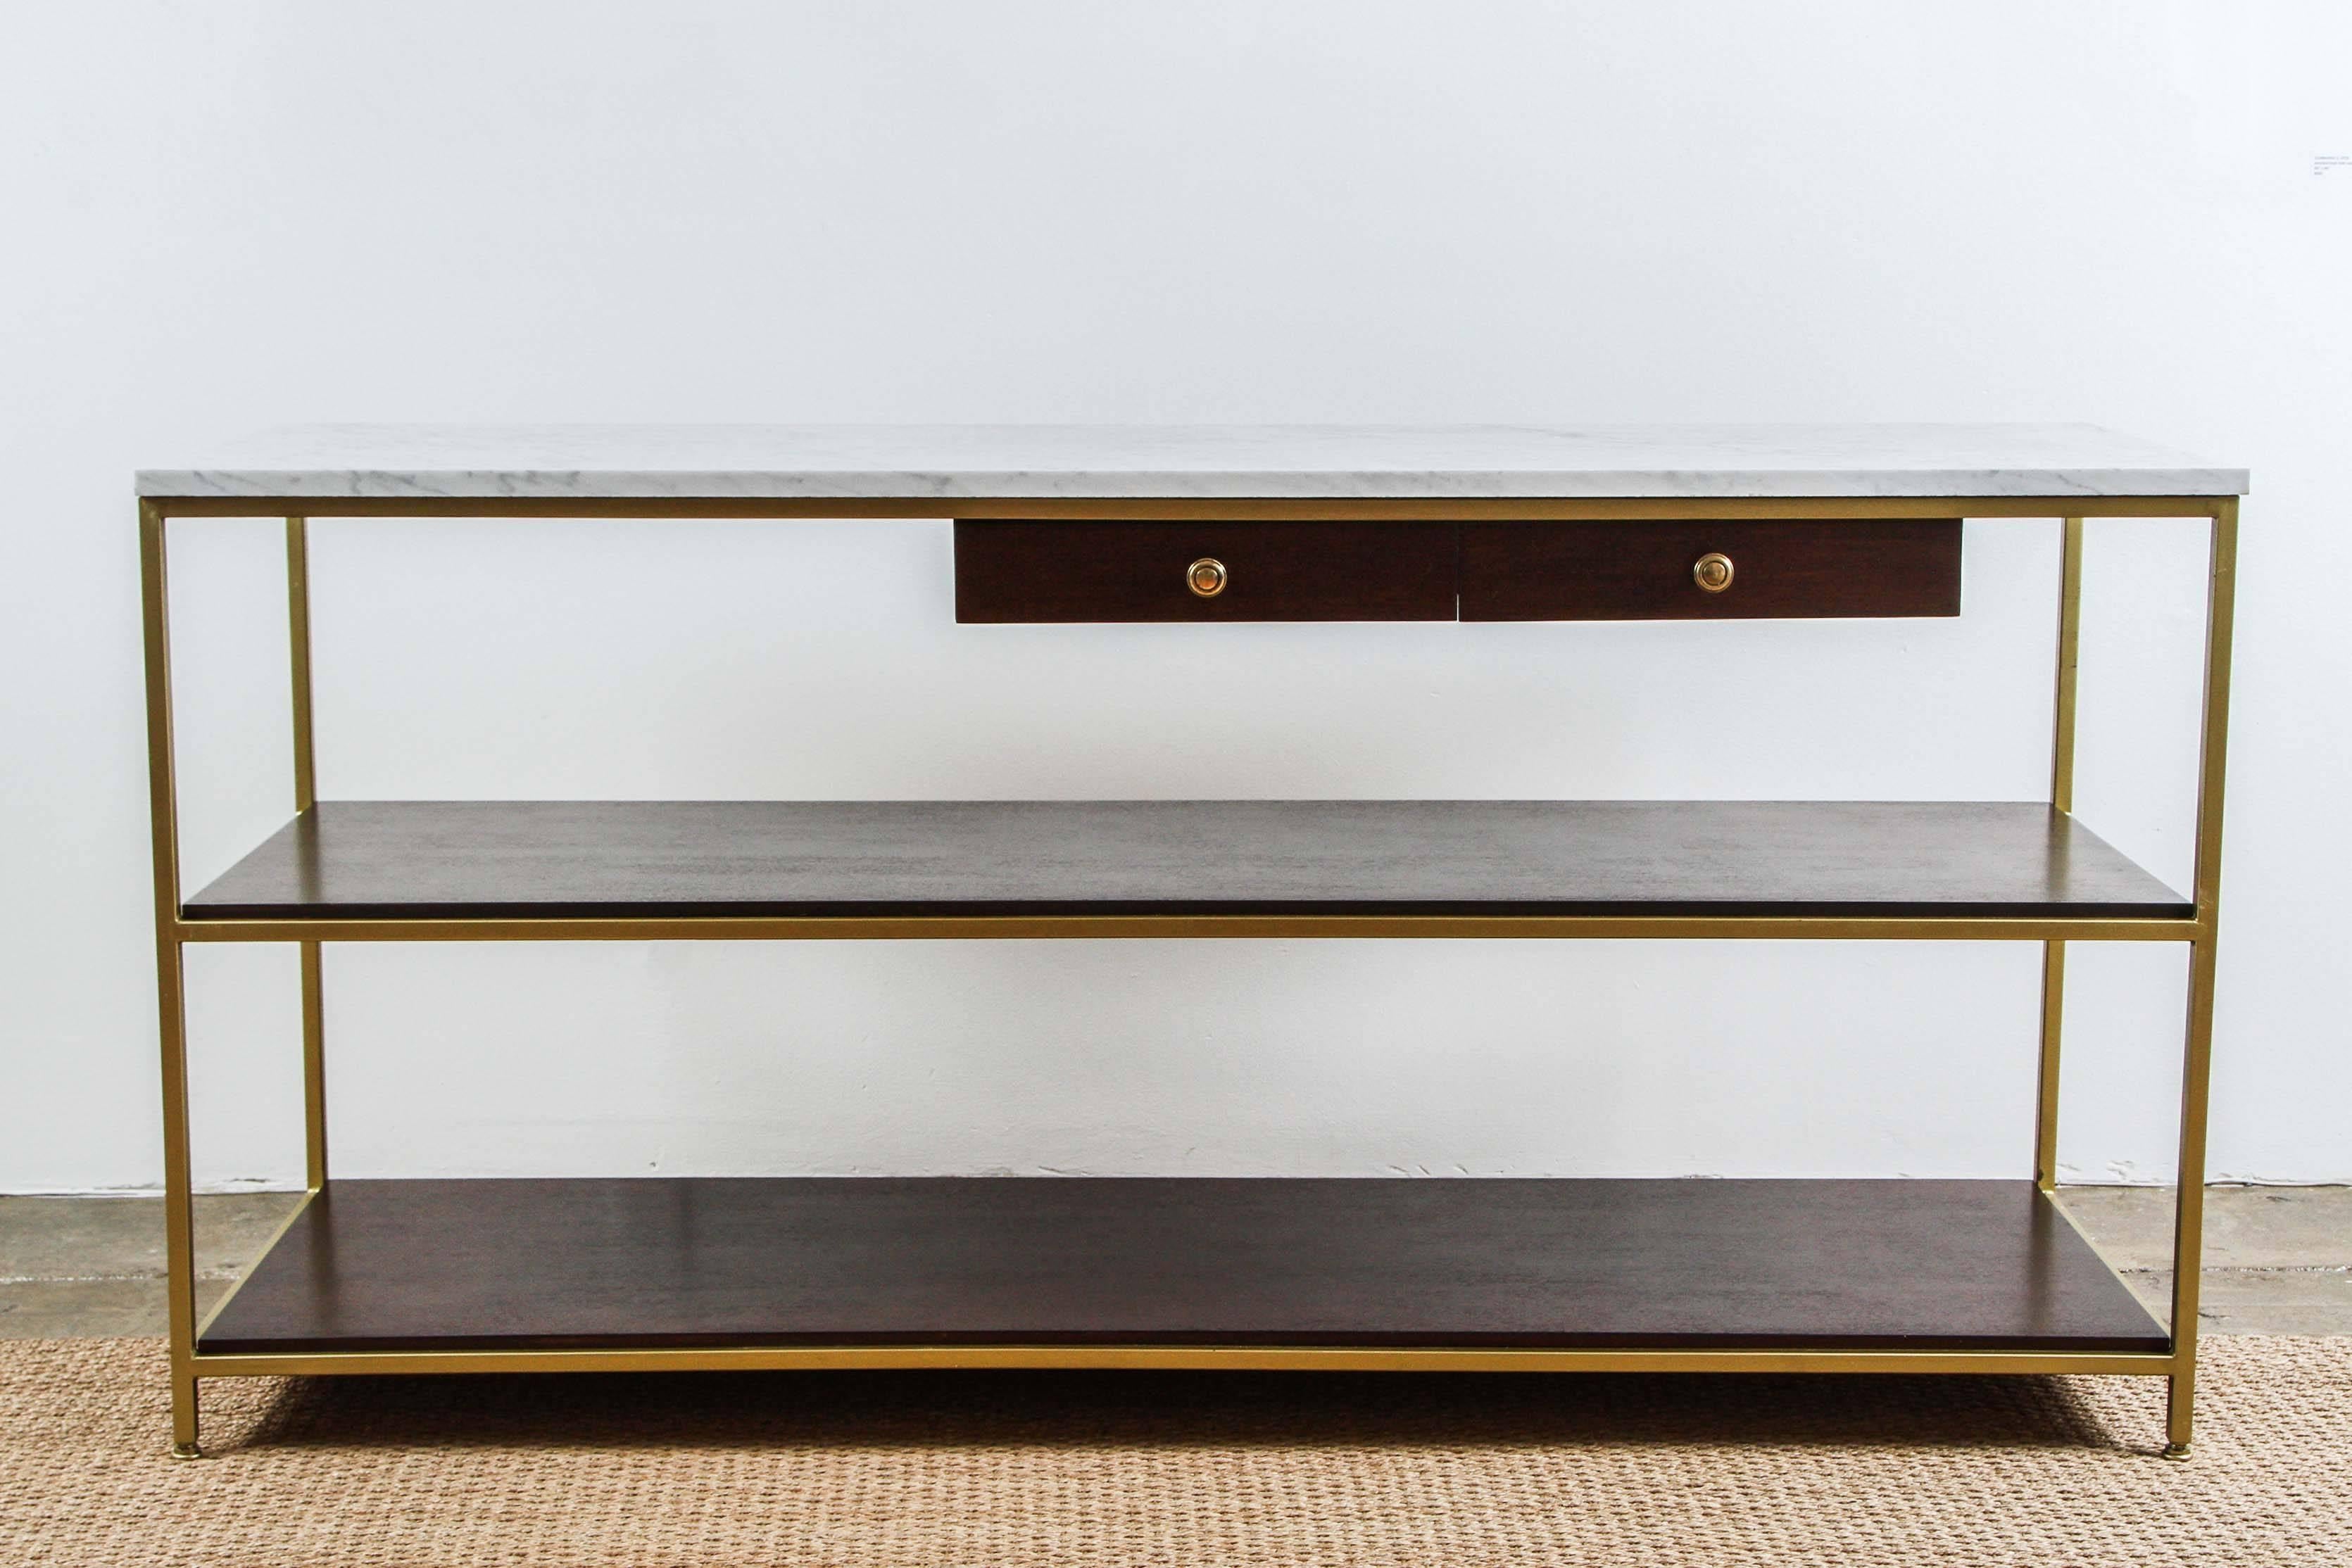 A vintage console, designed by Paul McCobb and produced circa 1950s by Calvin Furniture Co., with white marble top on brass frame, with two exterior drawers, each with brass knob pulls, over two wood shelves. Markings include original label [Calvin,